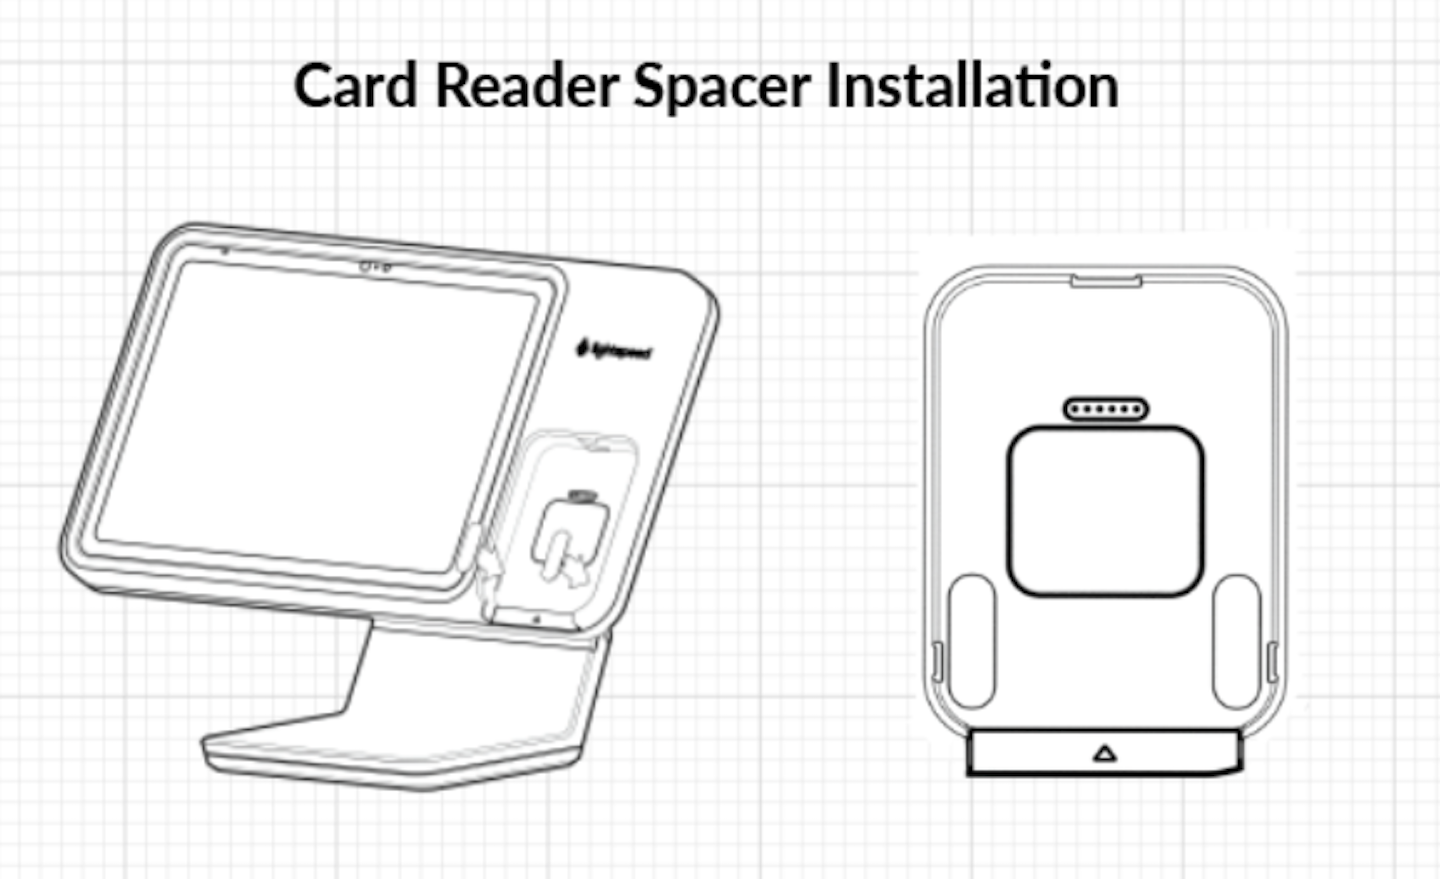 Illustration of Lightspeed Stand with Payments with two adhesive strips installed into the cut-out section for the Reader.